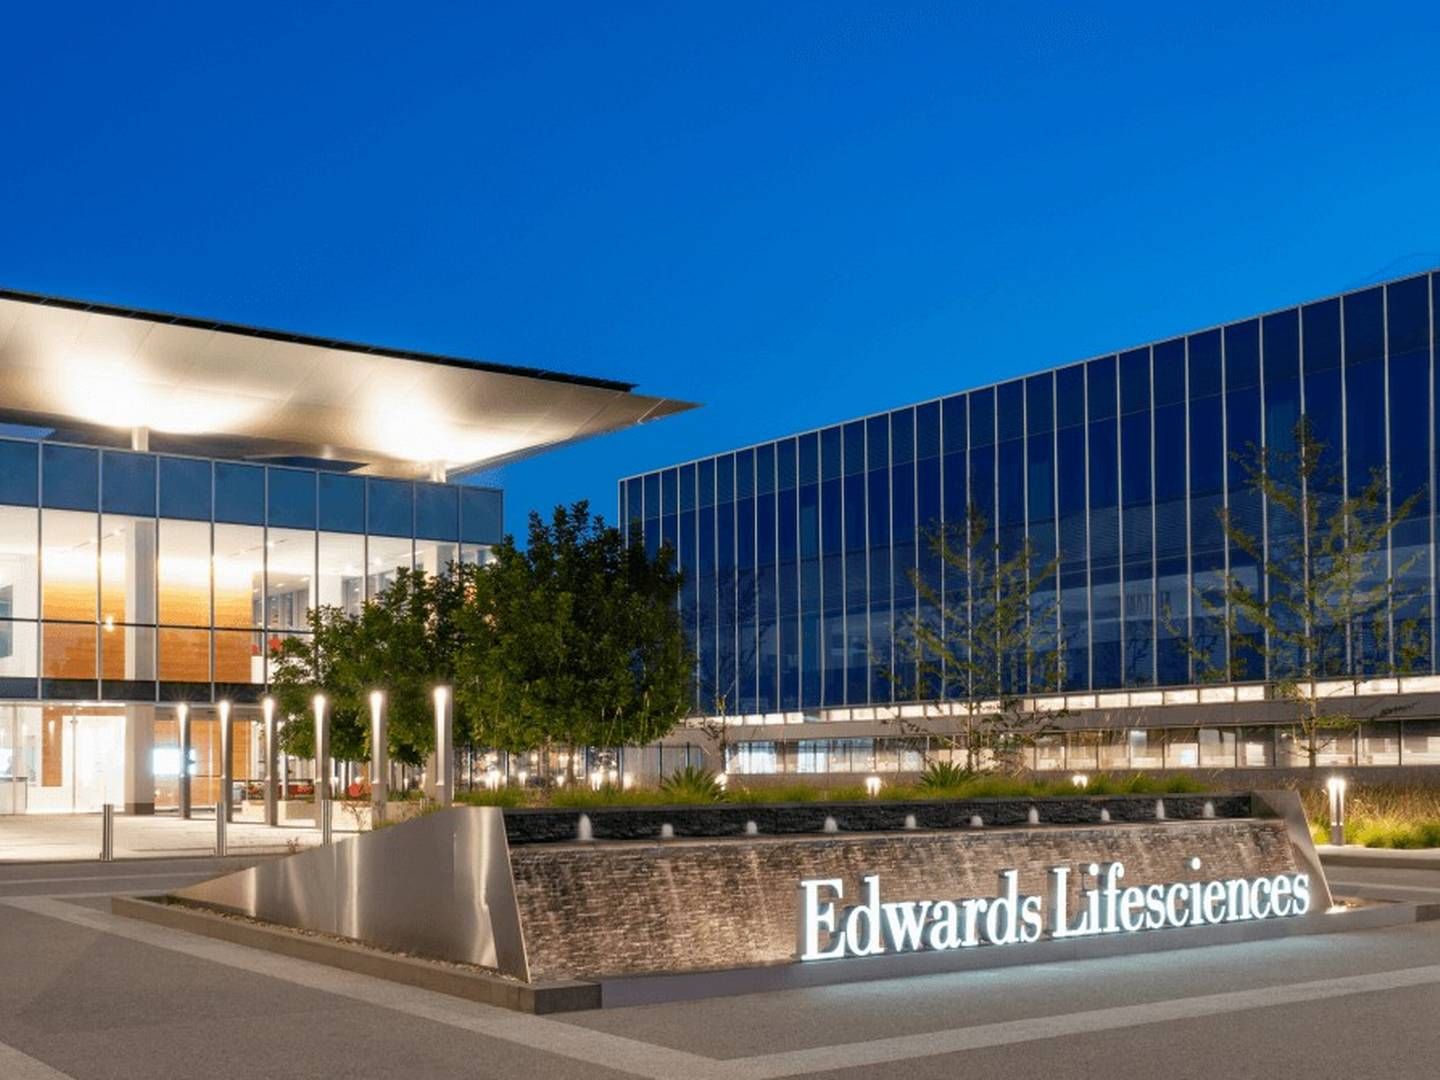 Edward Lifescience specializes in heart disease and surgical monitoring. It is headquartered in Irvine, California. | Foto: Edward Lifesciences